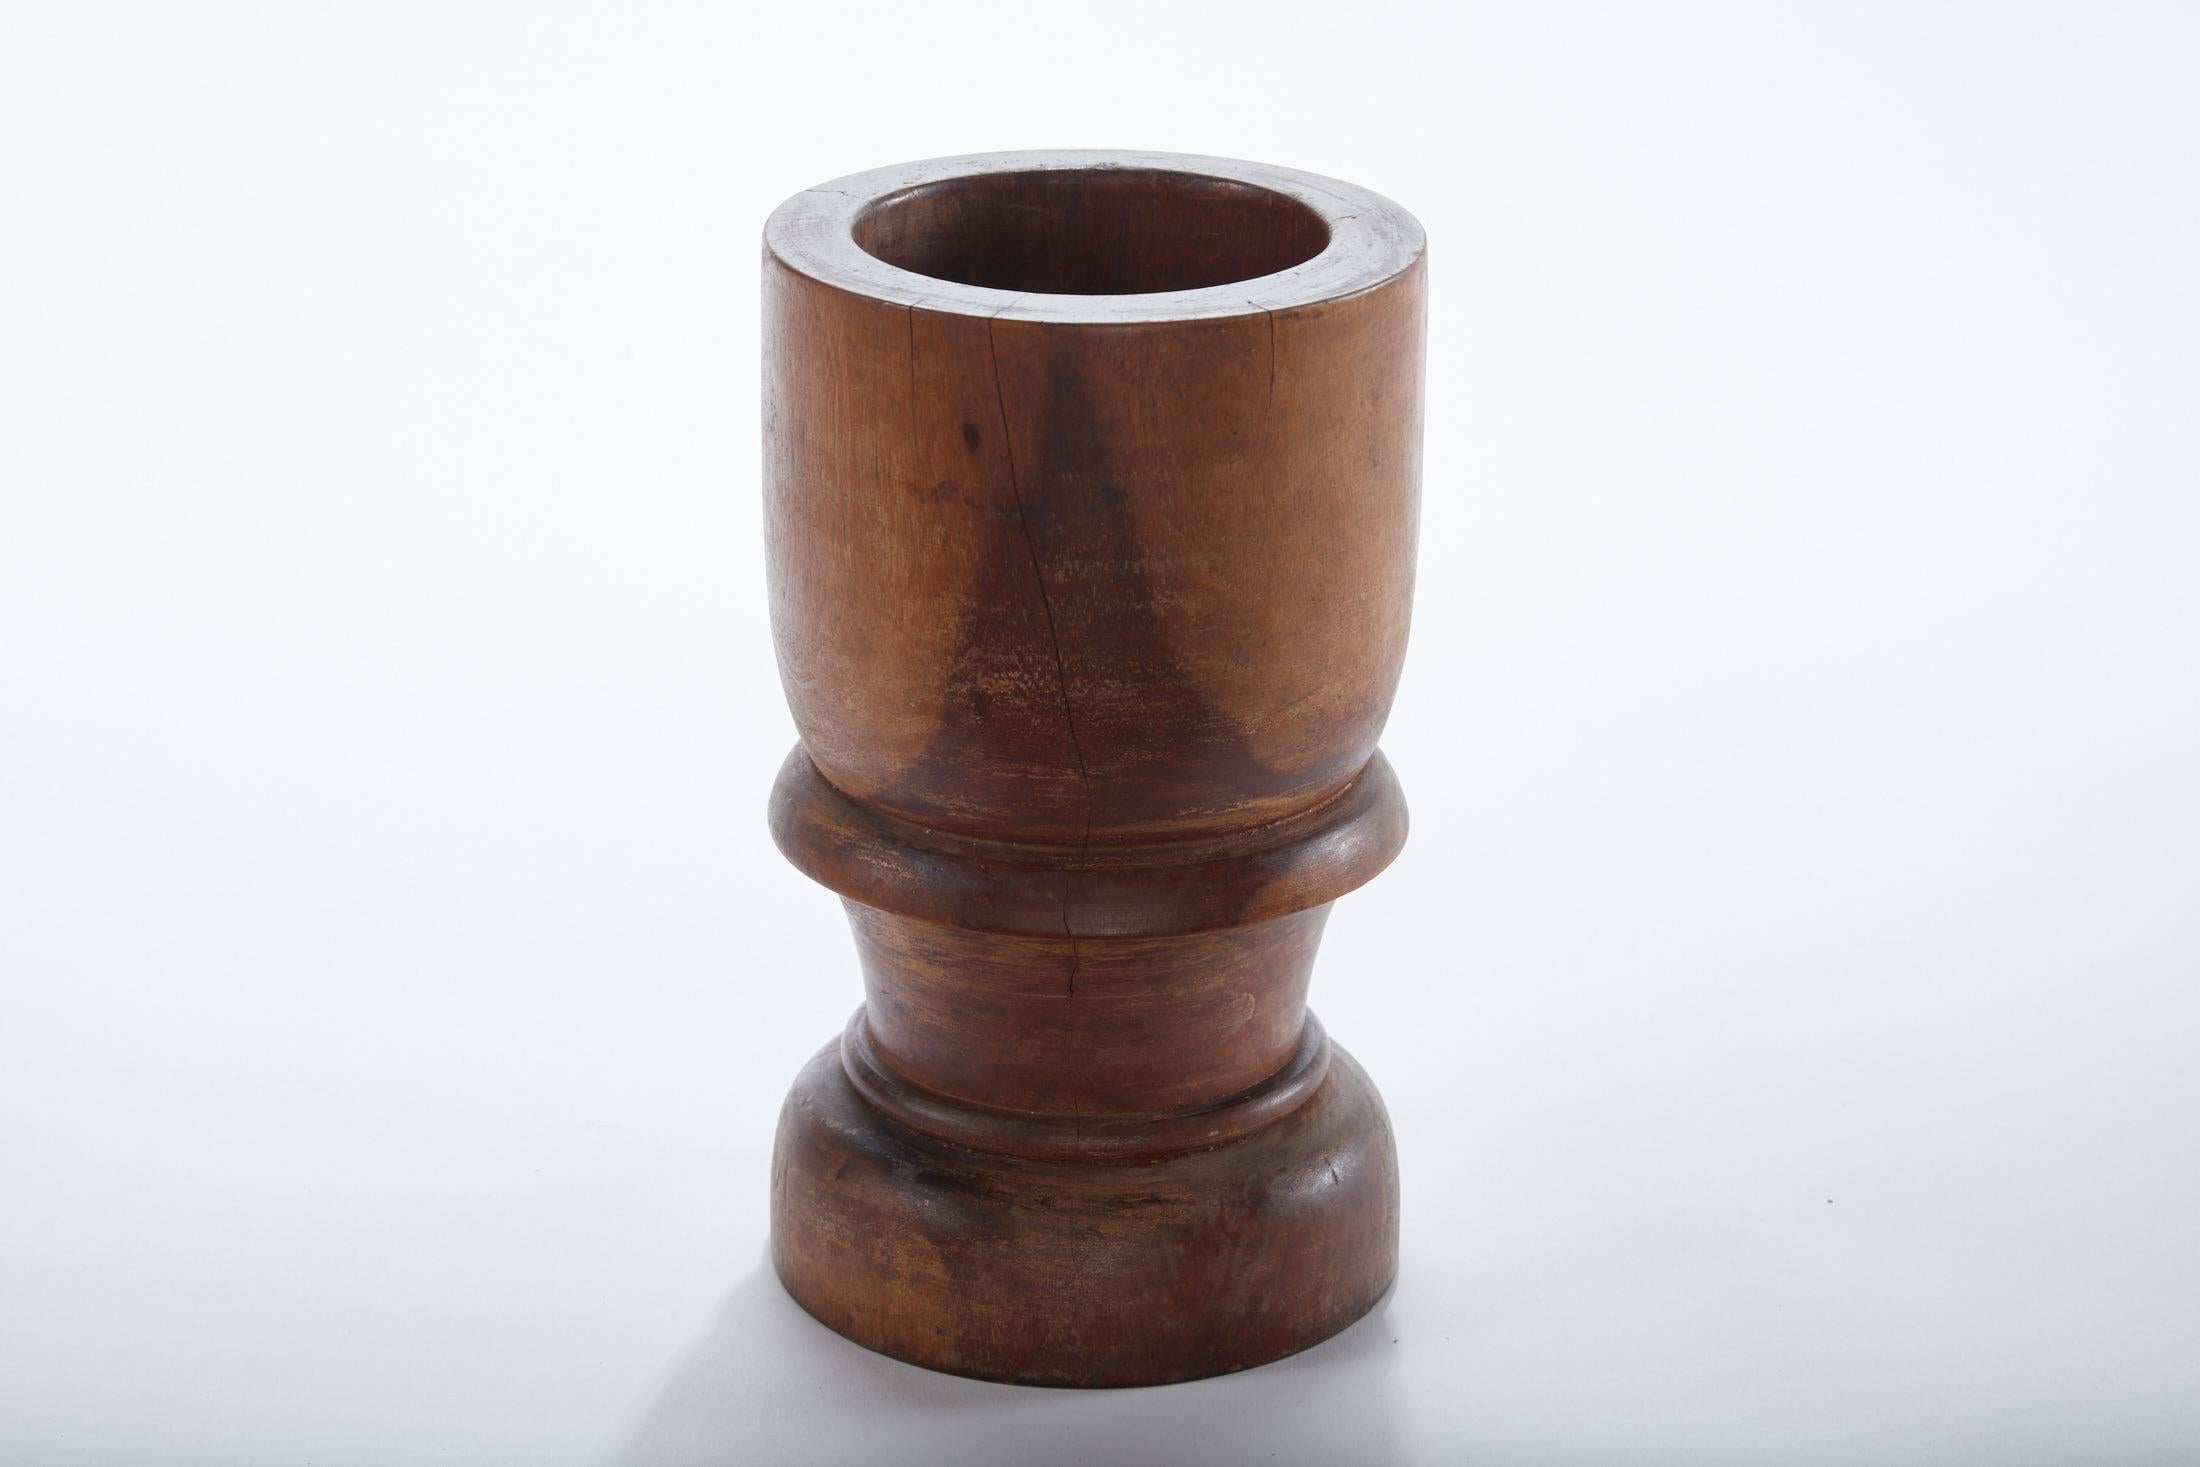 Early 20th century wooden mortar from Argentina
Found in the frontier region of the country.